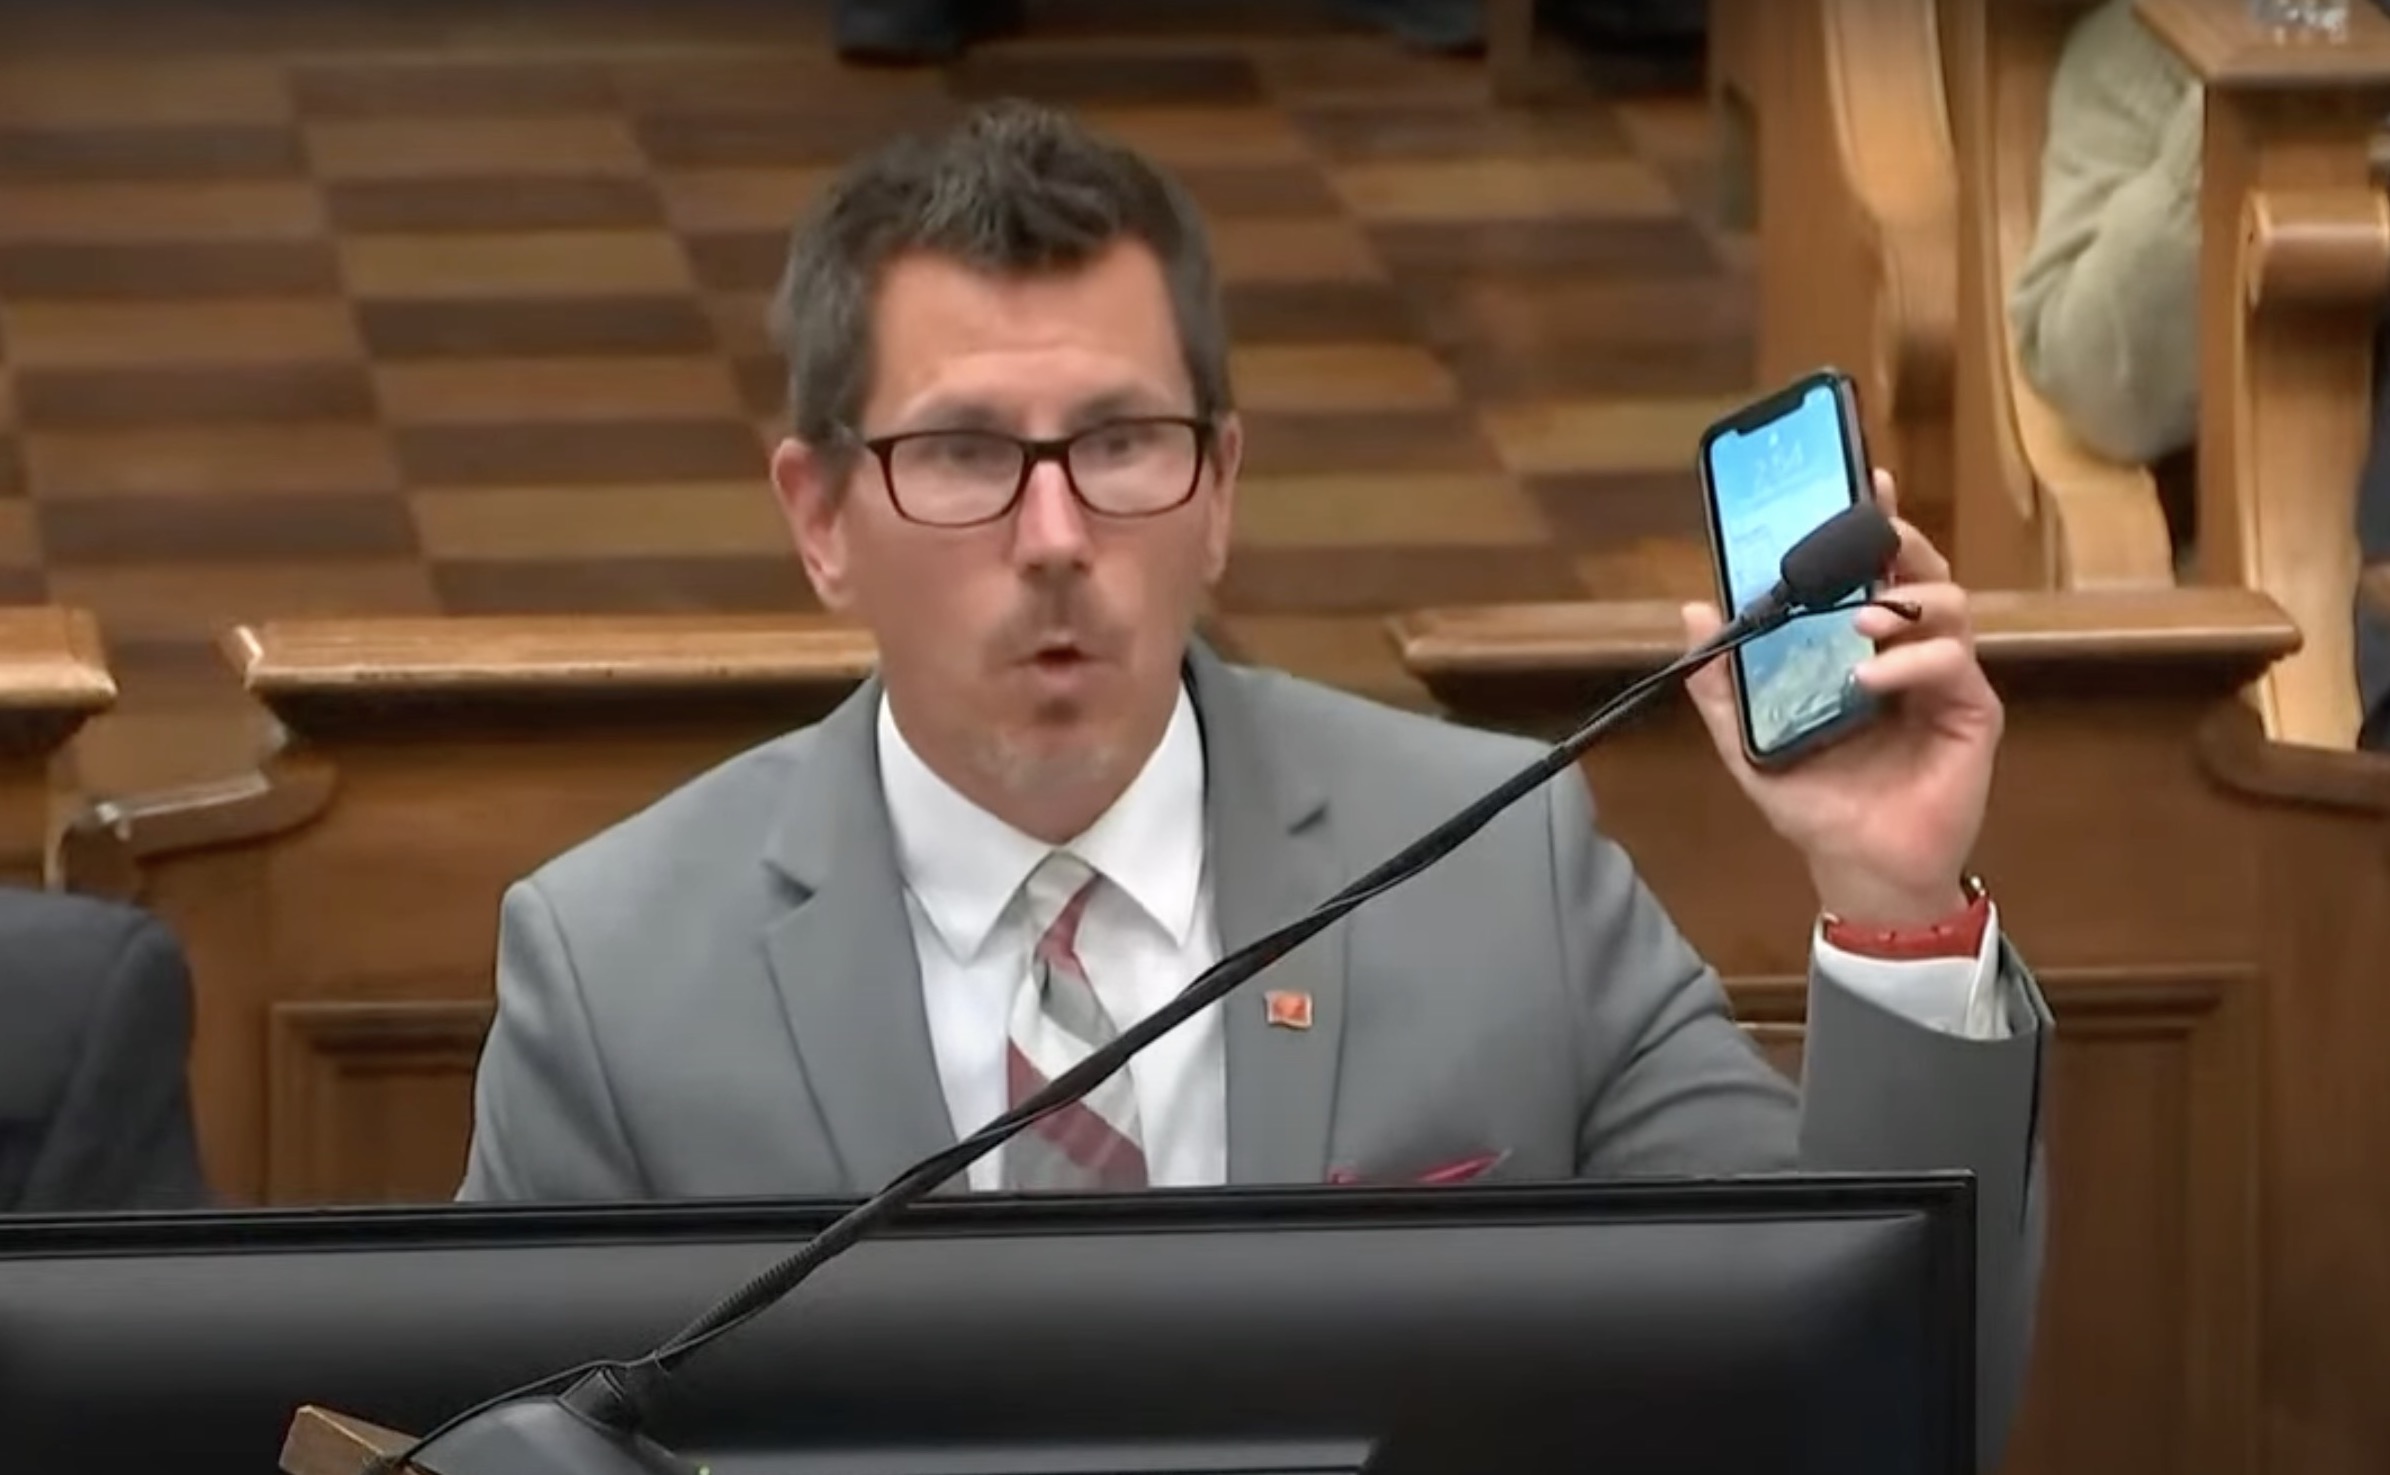 Technology Kenosha County prosecutor Thomas Binger holds up his iPhone while arguing that pinch-to-zoom should be allowed when showing video during cross-examination in this screenshot from the Washington Post's livestream.